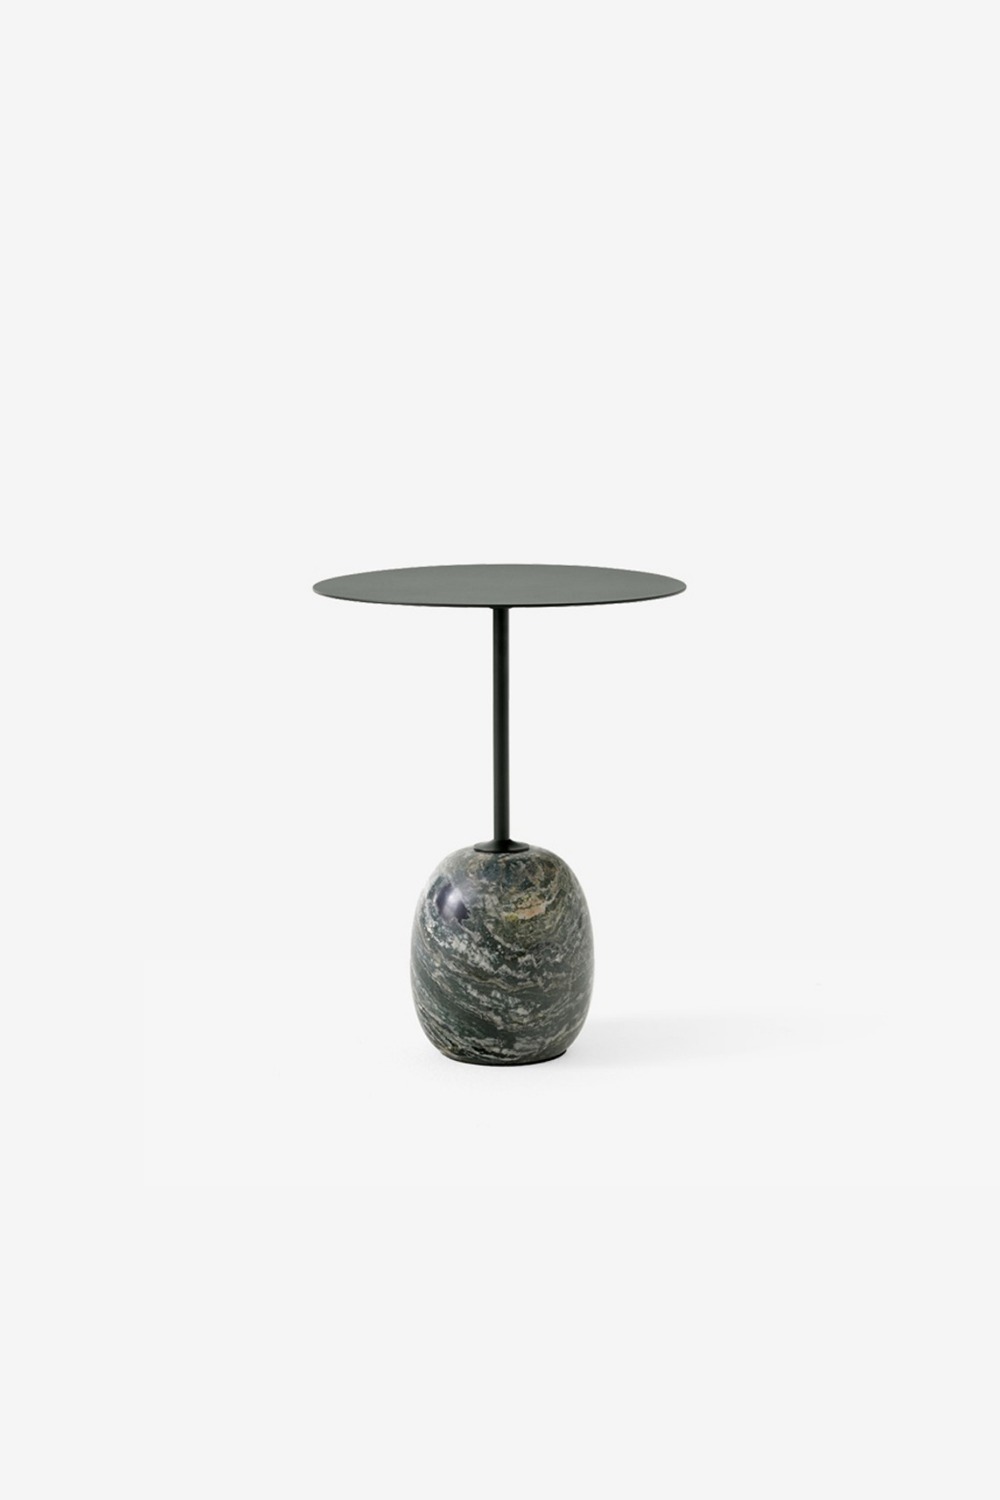 [&amp;Tradition] Lato side table/ LN8 (Deep Green)